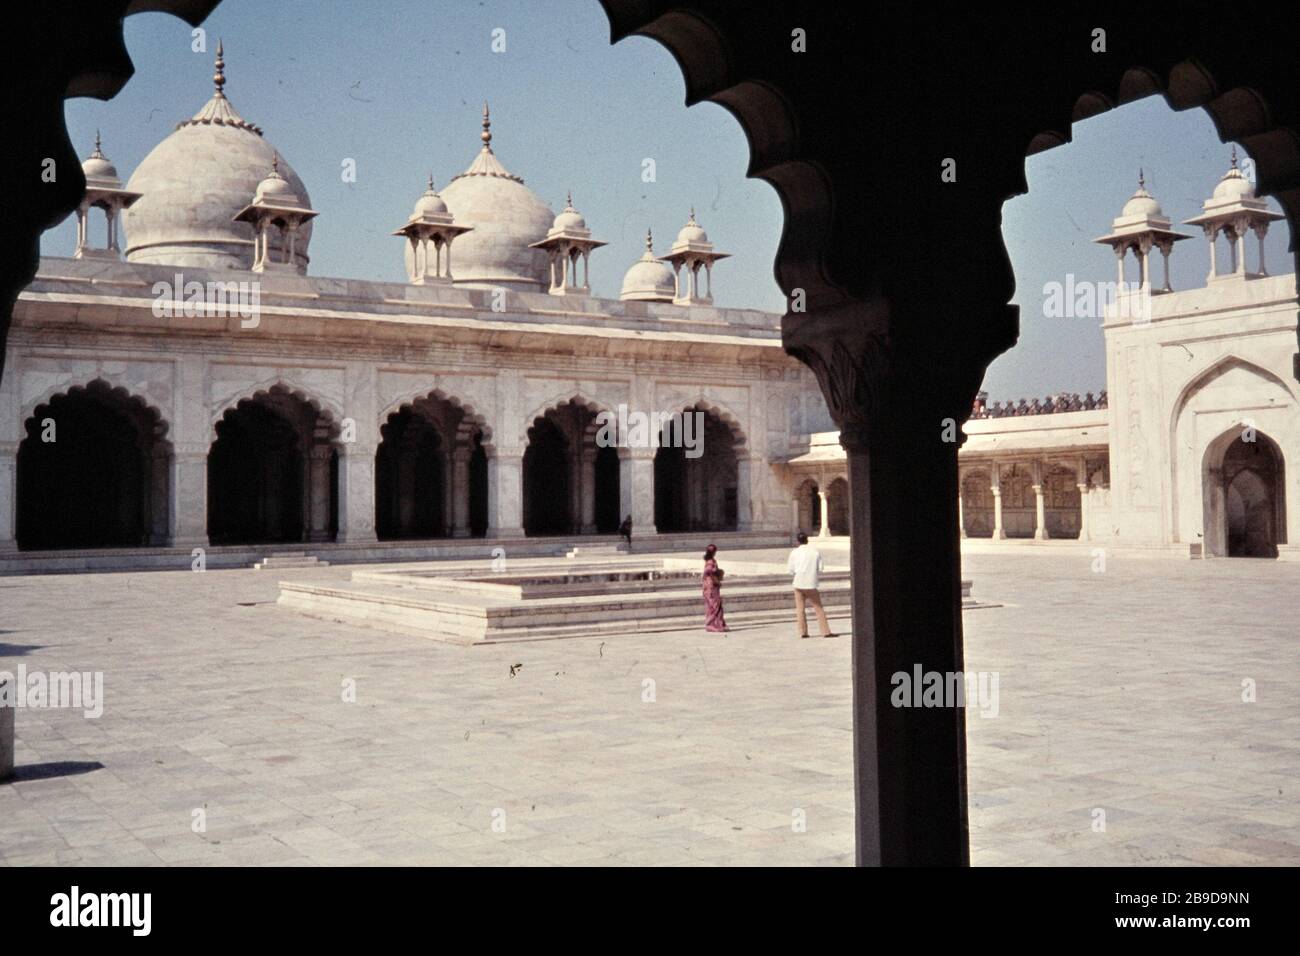 A man and a woman are standing in the courtyard of the Moti Masjid ...